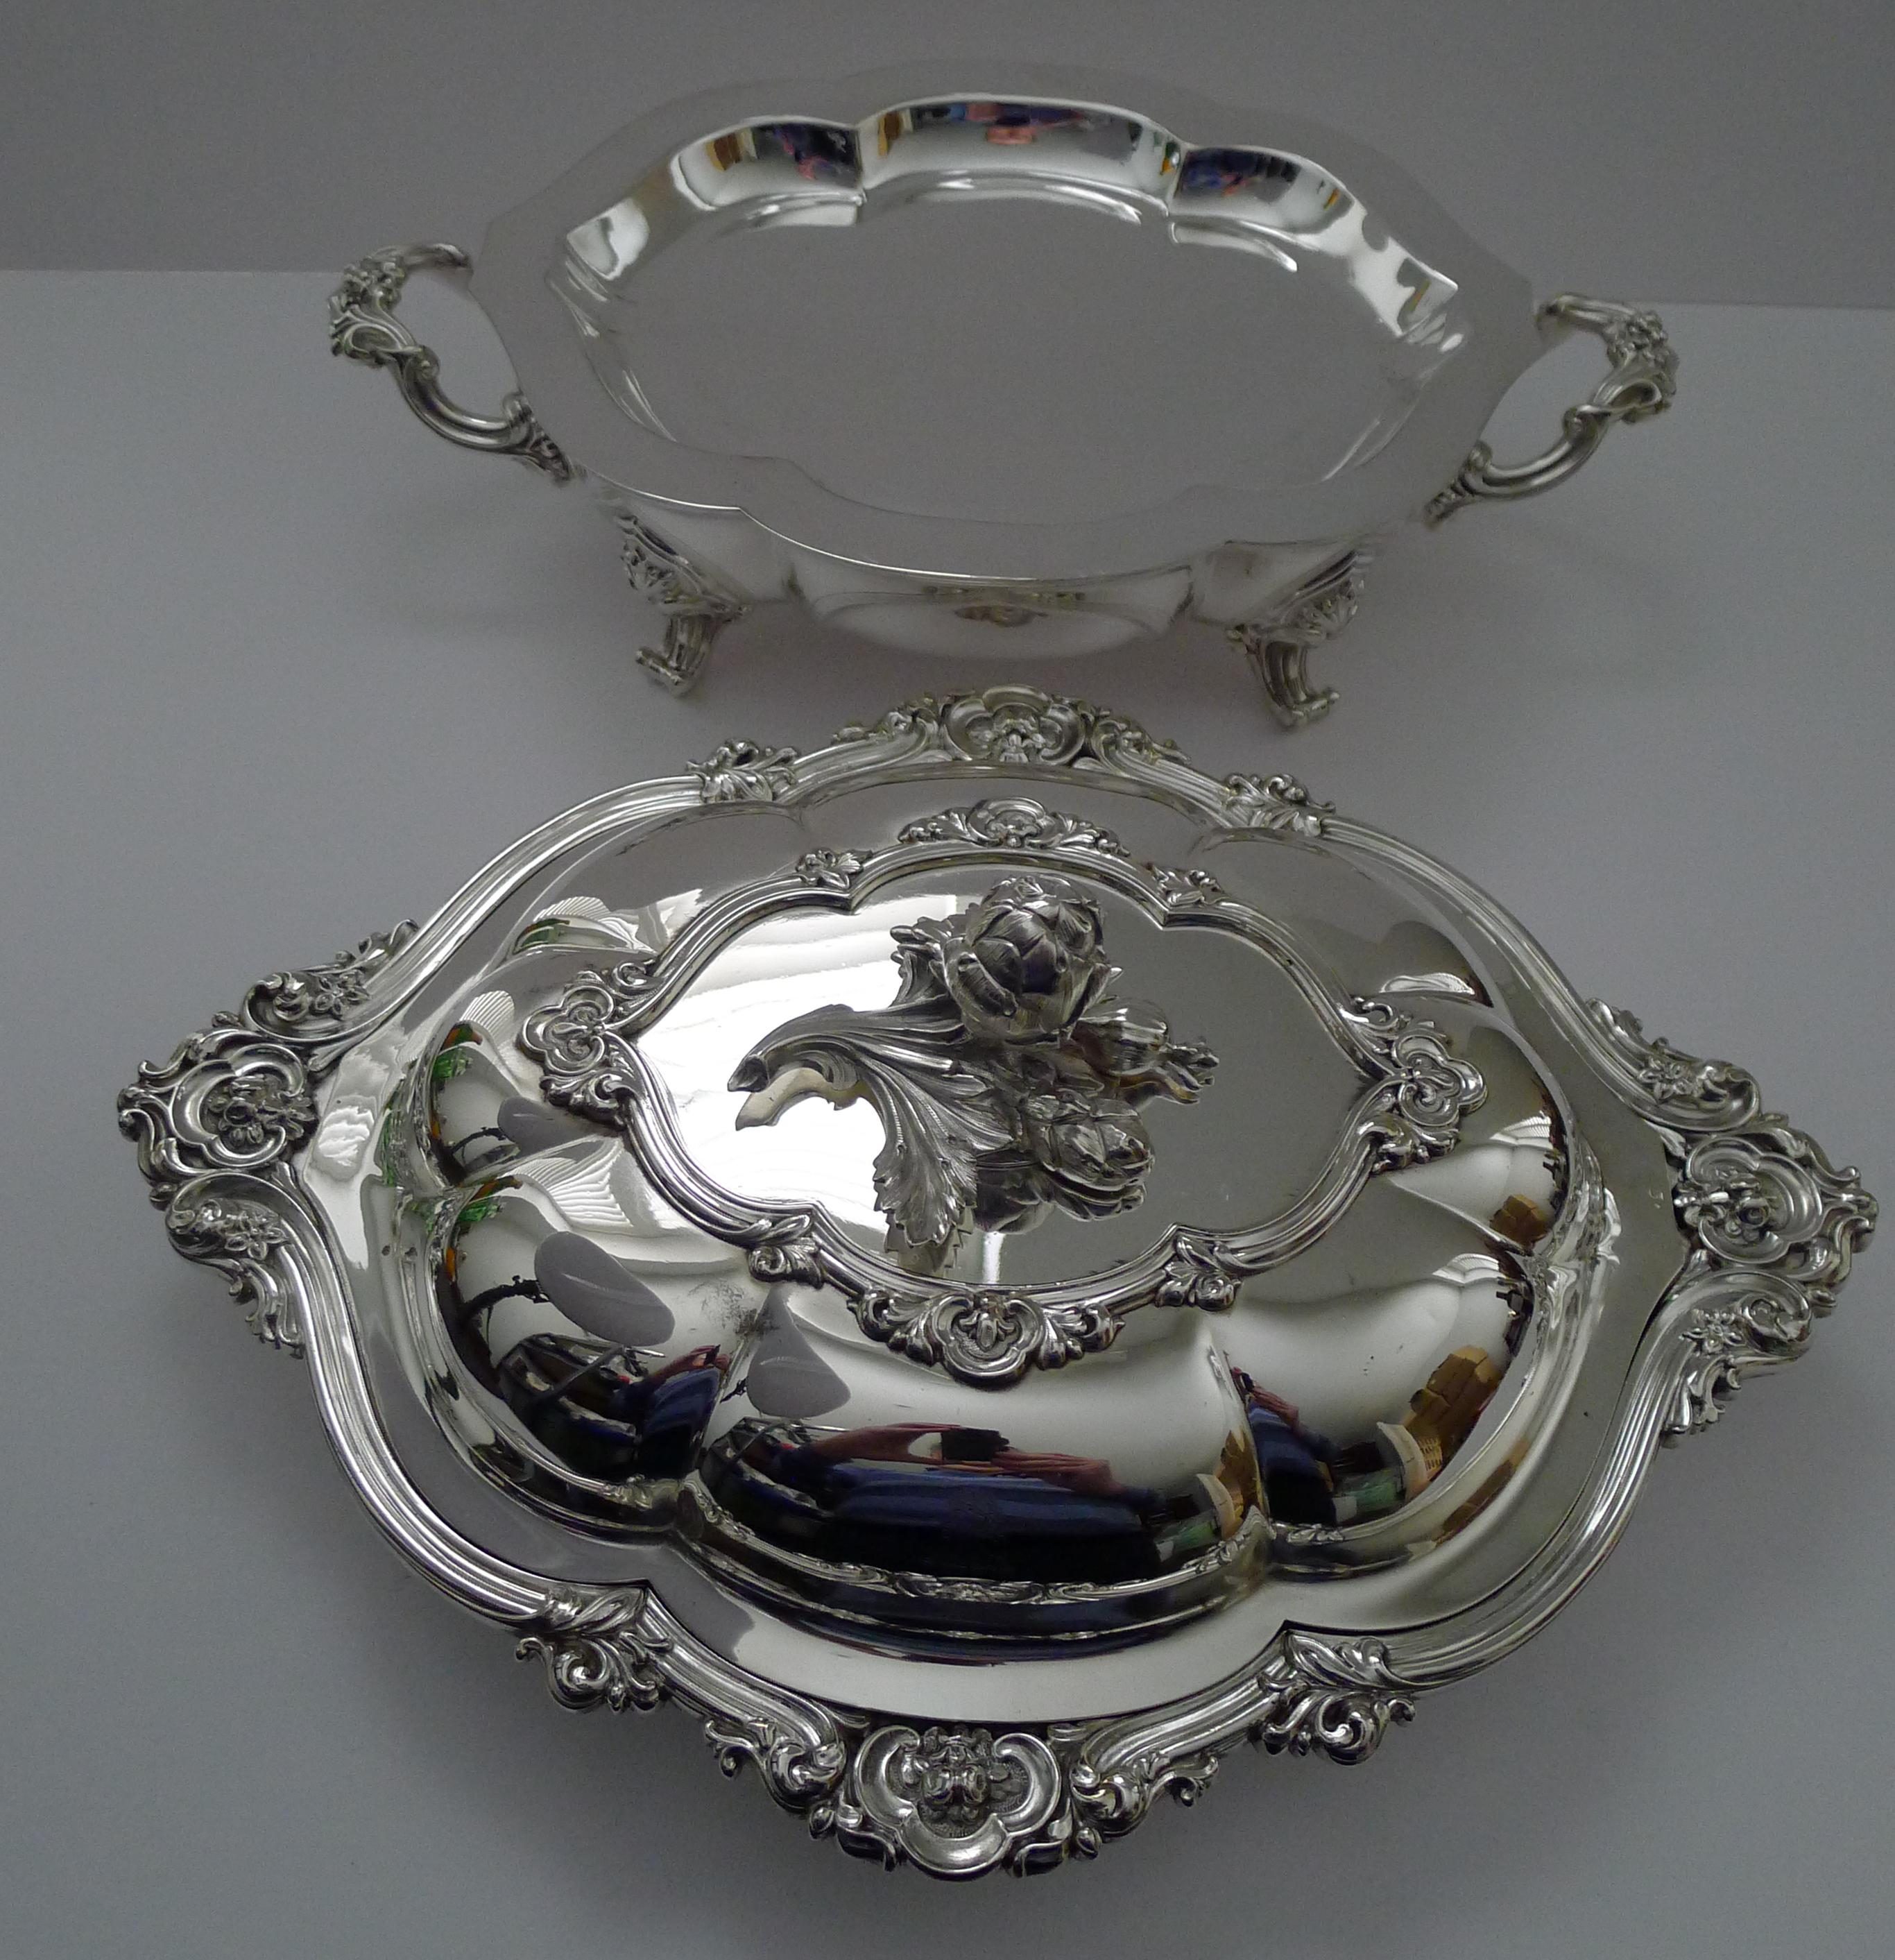 About as grand as they get, this is a rare early Victorian silver plated Entree / Chafing dish in silver plate by the top-notch silversmith, Elkington Mason & Co. 

The dish comes in four pieces, the footed base to store hot water to keep the